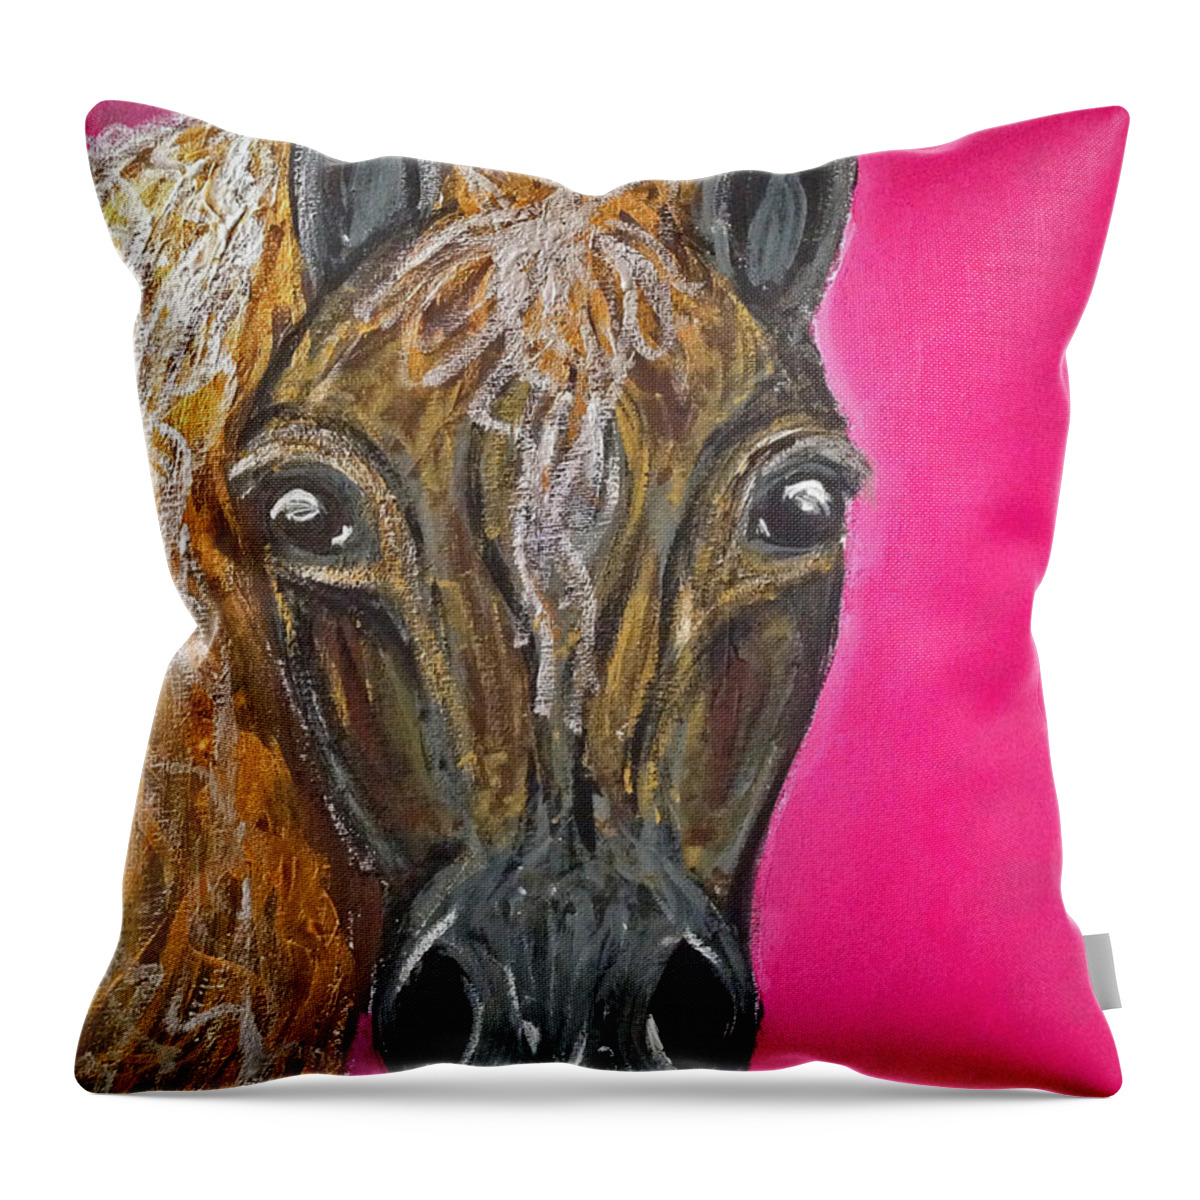 Horse Painting Throw Pillow featuring the painting Goldie by Ania M Milo